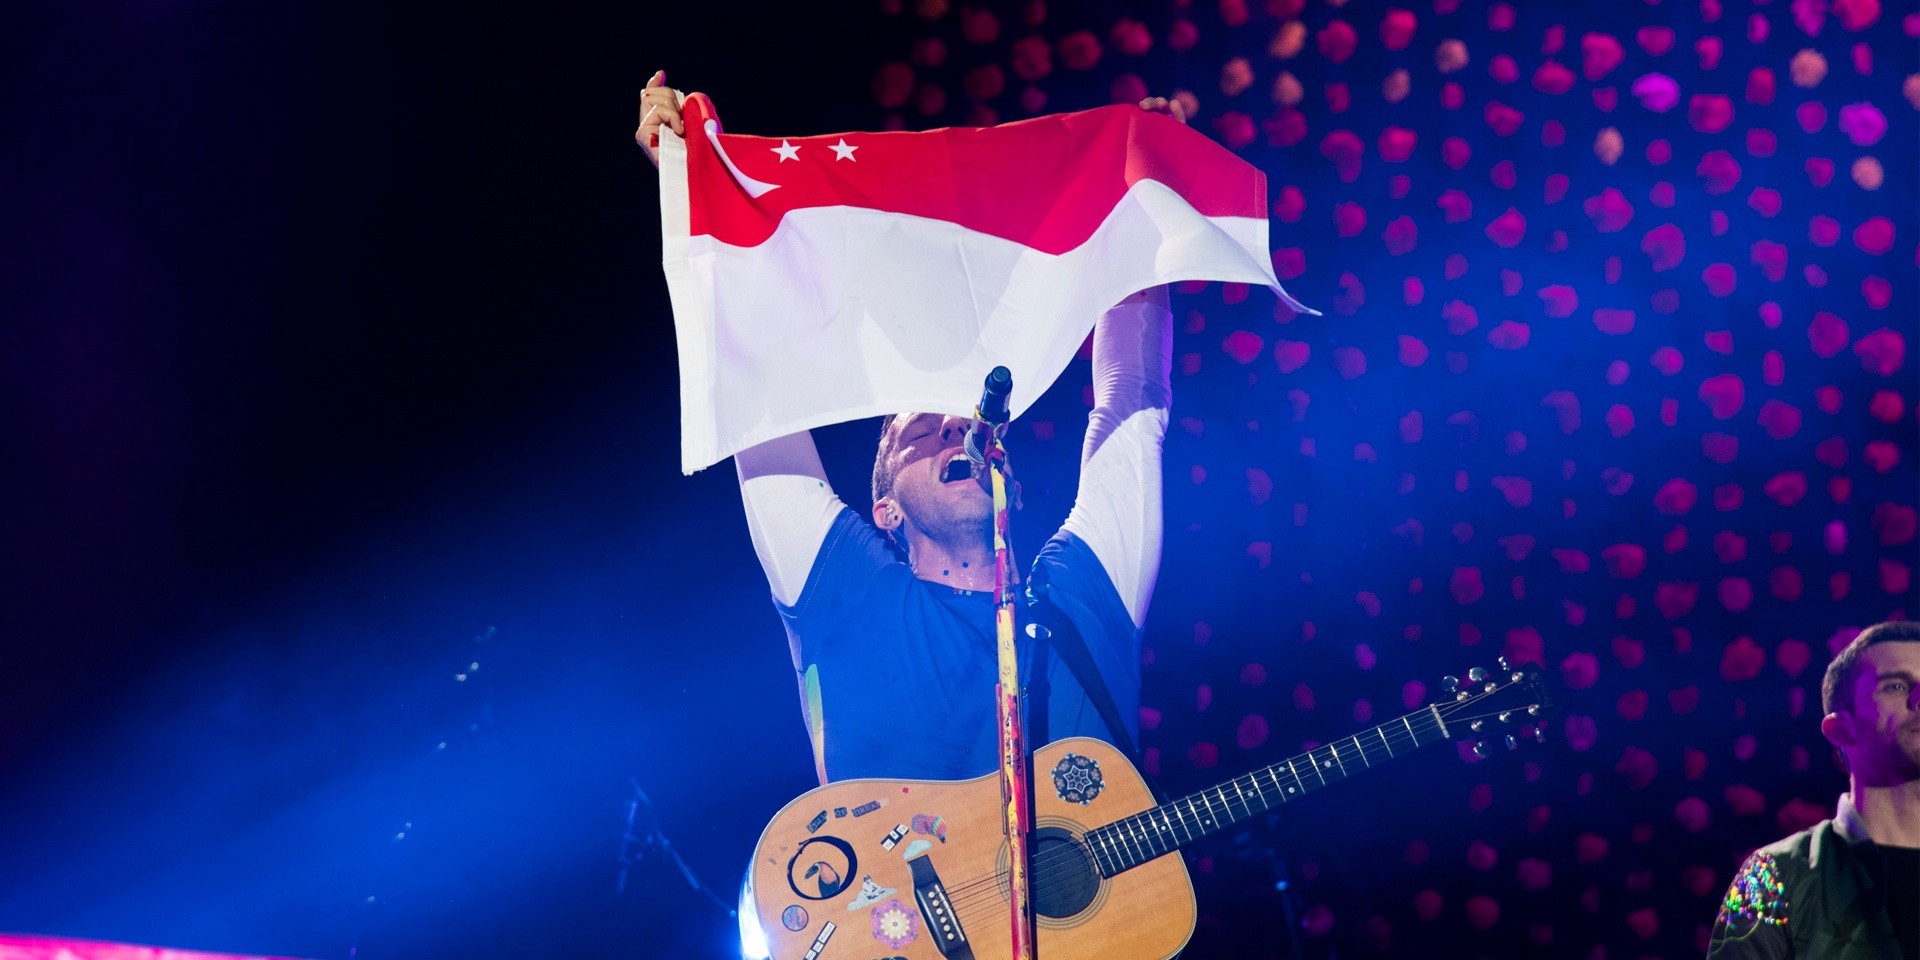 GIG REPORT: Coldplay performs stellar first night in Singapore with over 50,000 in attendance